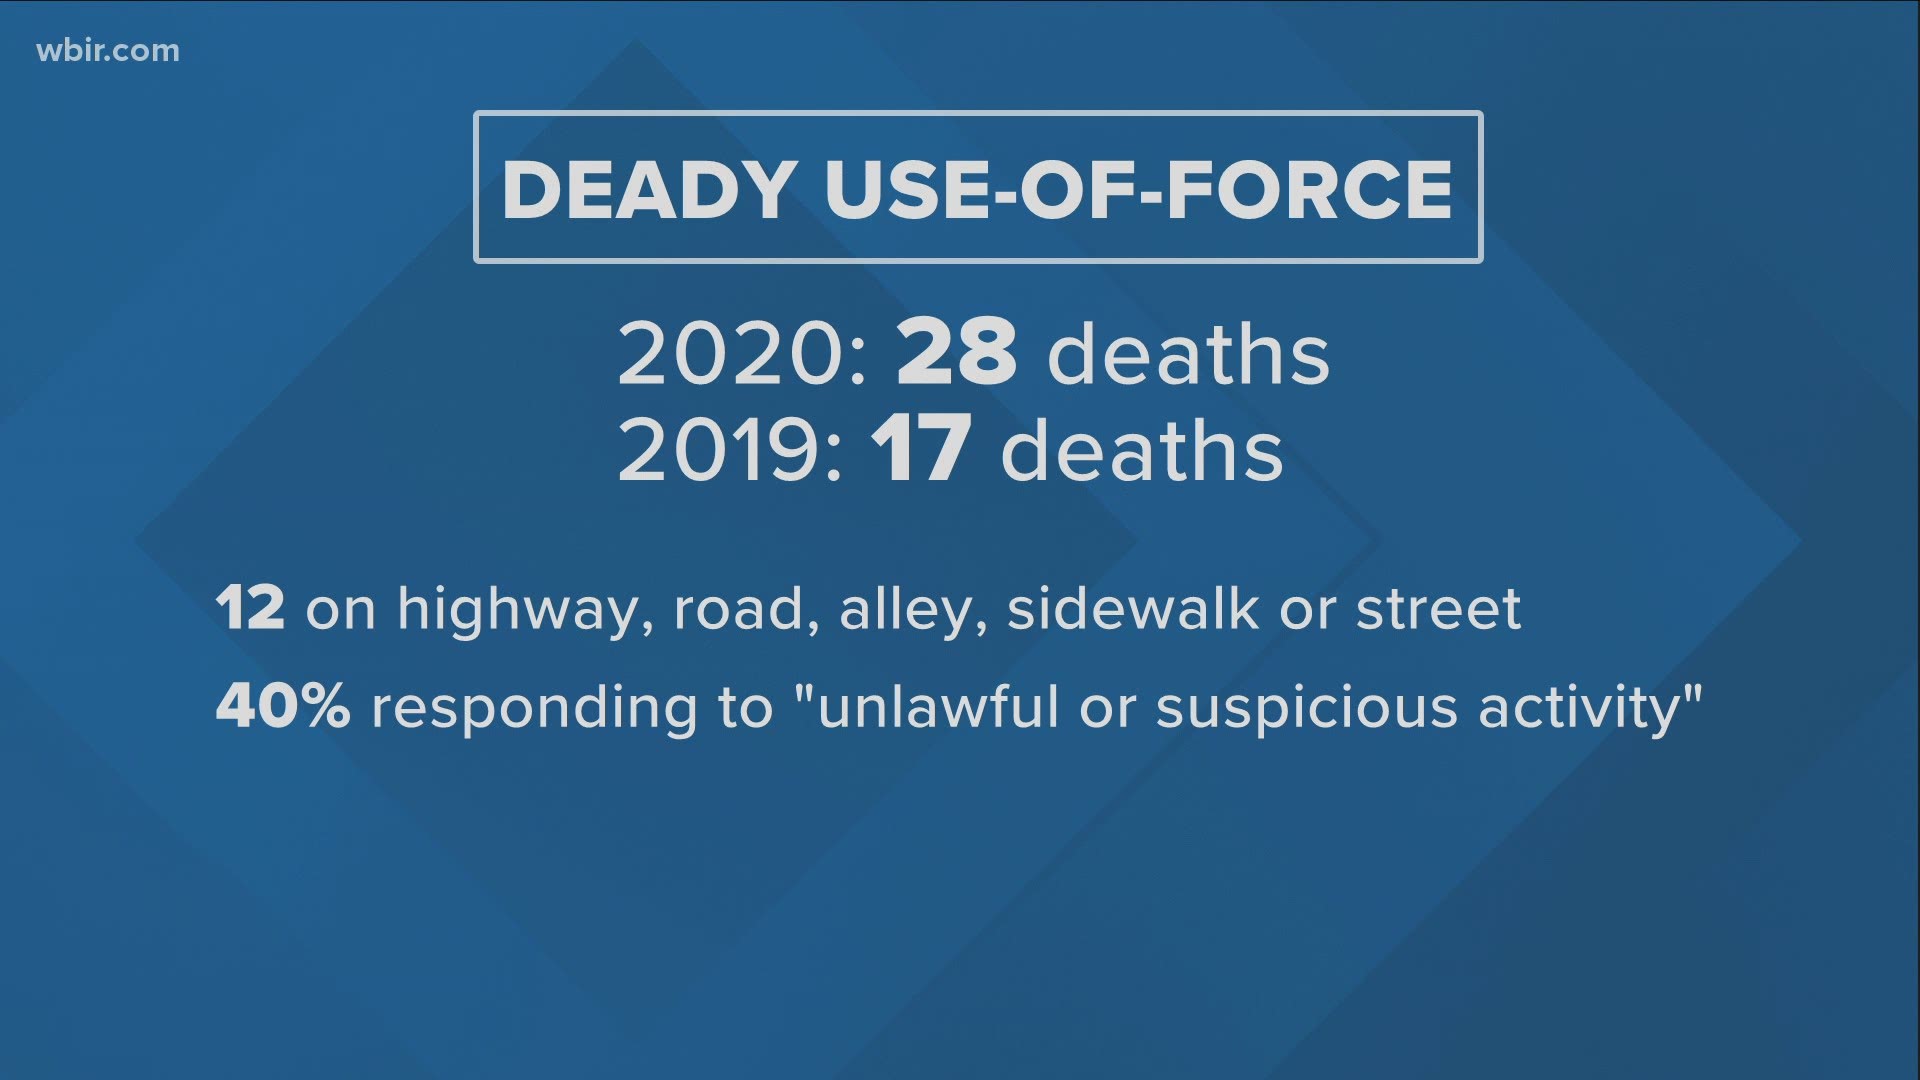 Across Tennessee, 28 people died in deadly force cases with law enforcement during 2020.